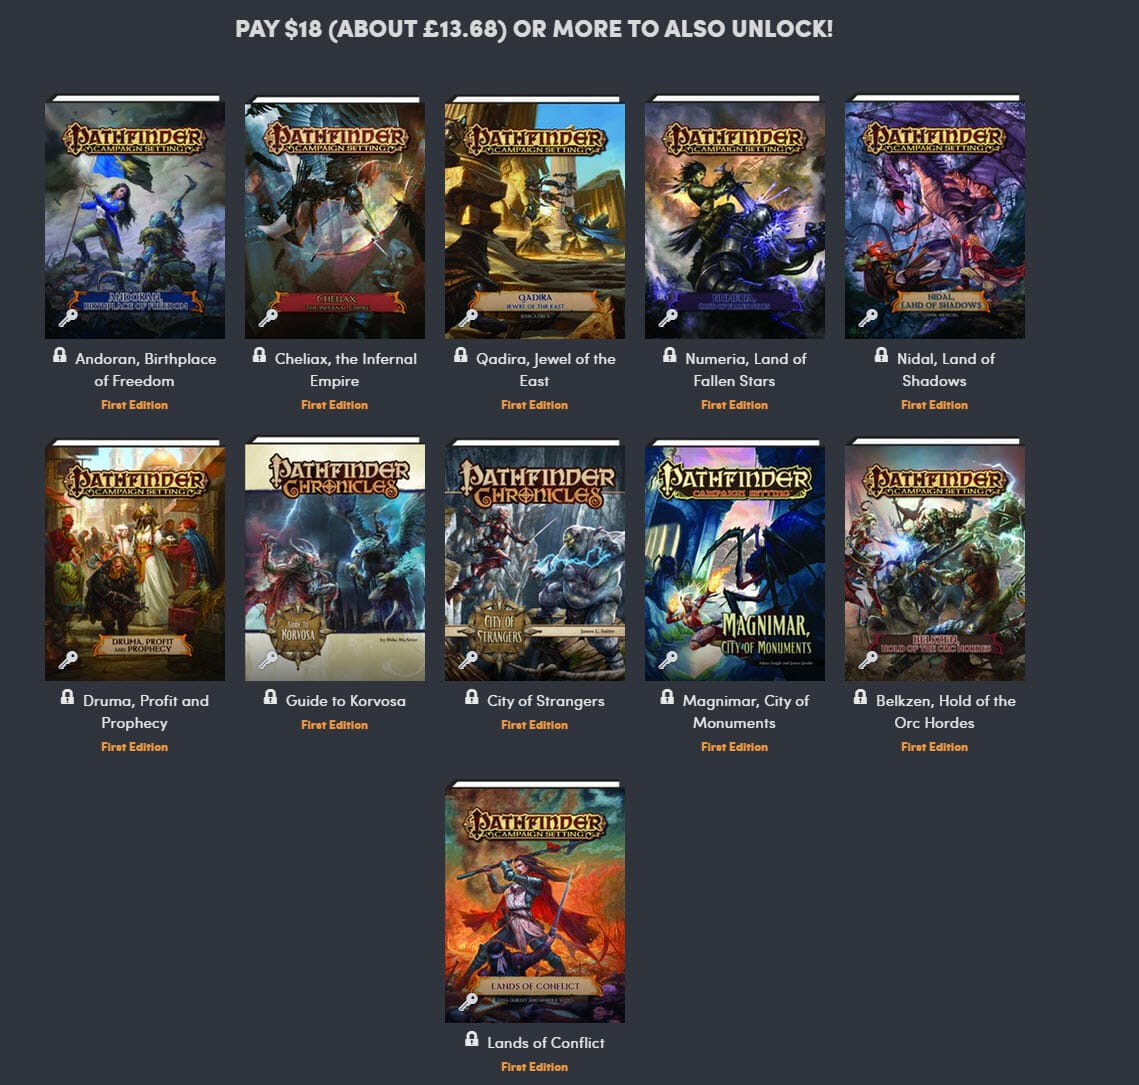 PRESS RELEASE: Humble RPG Book Bundle: Pathfinder Lost Omens Lore Archive  by Paizo – Tessera Guild